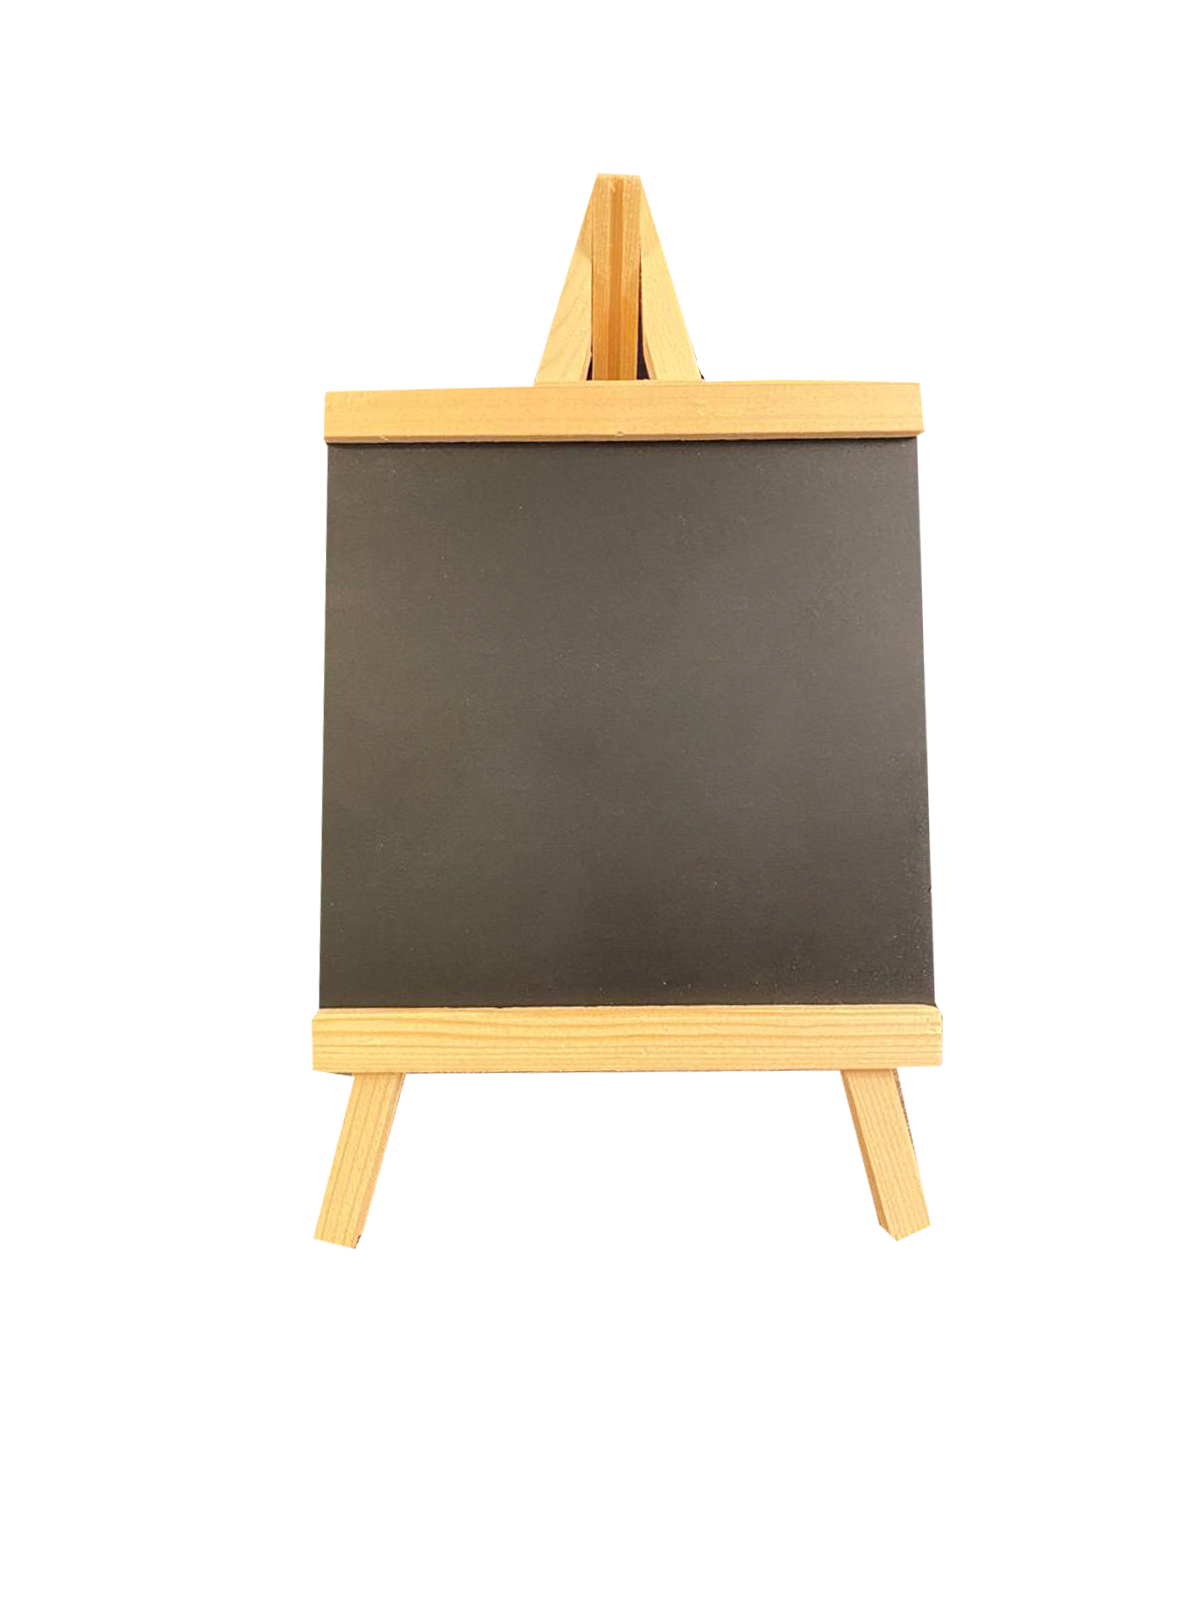 black board with stand